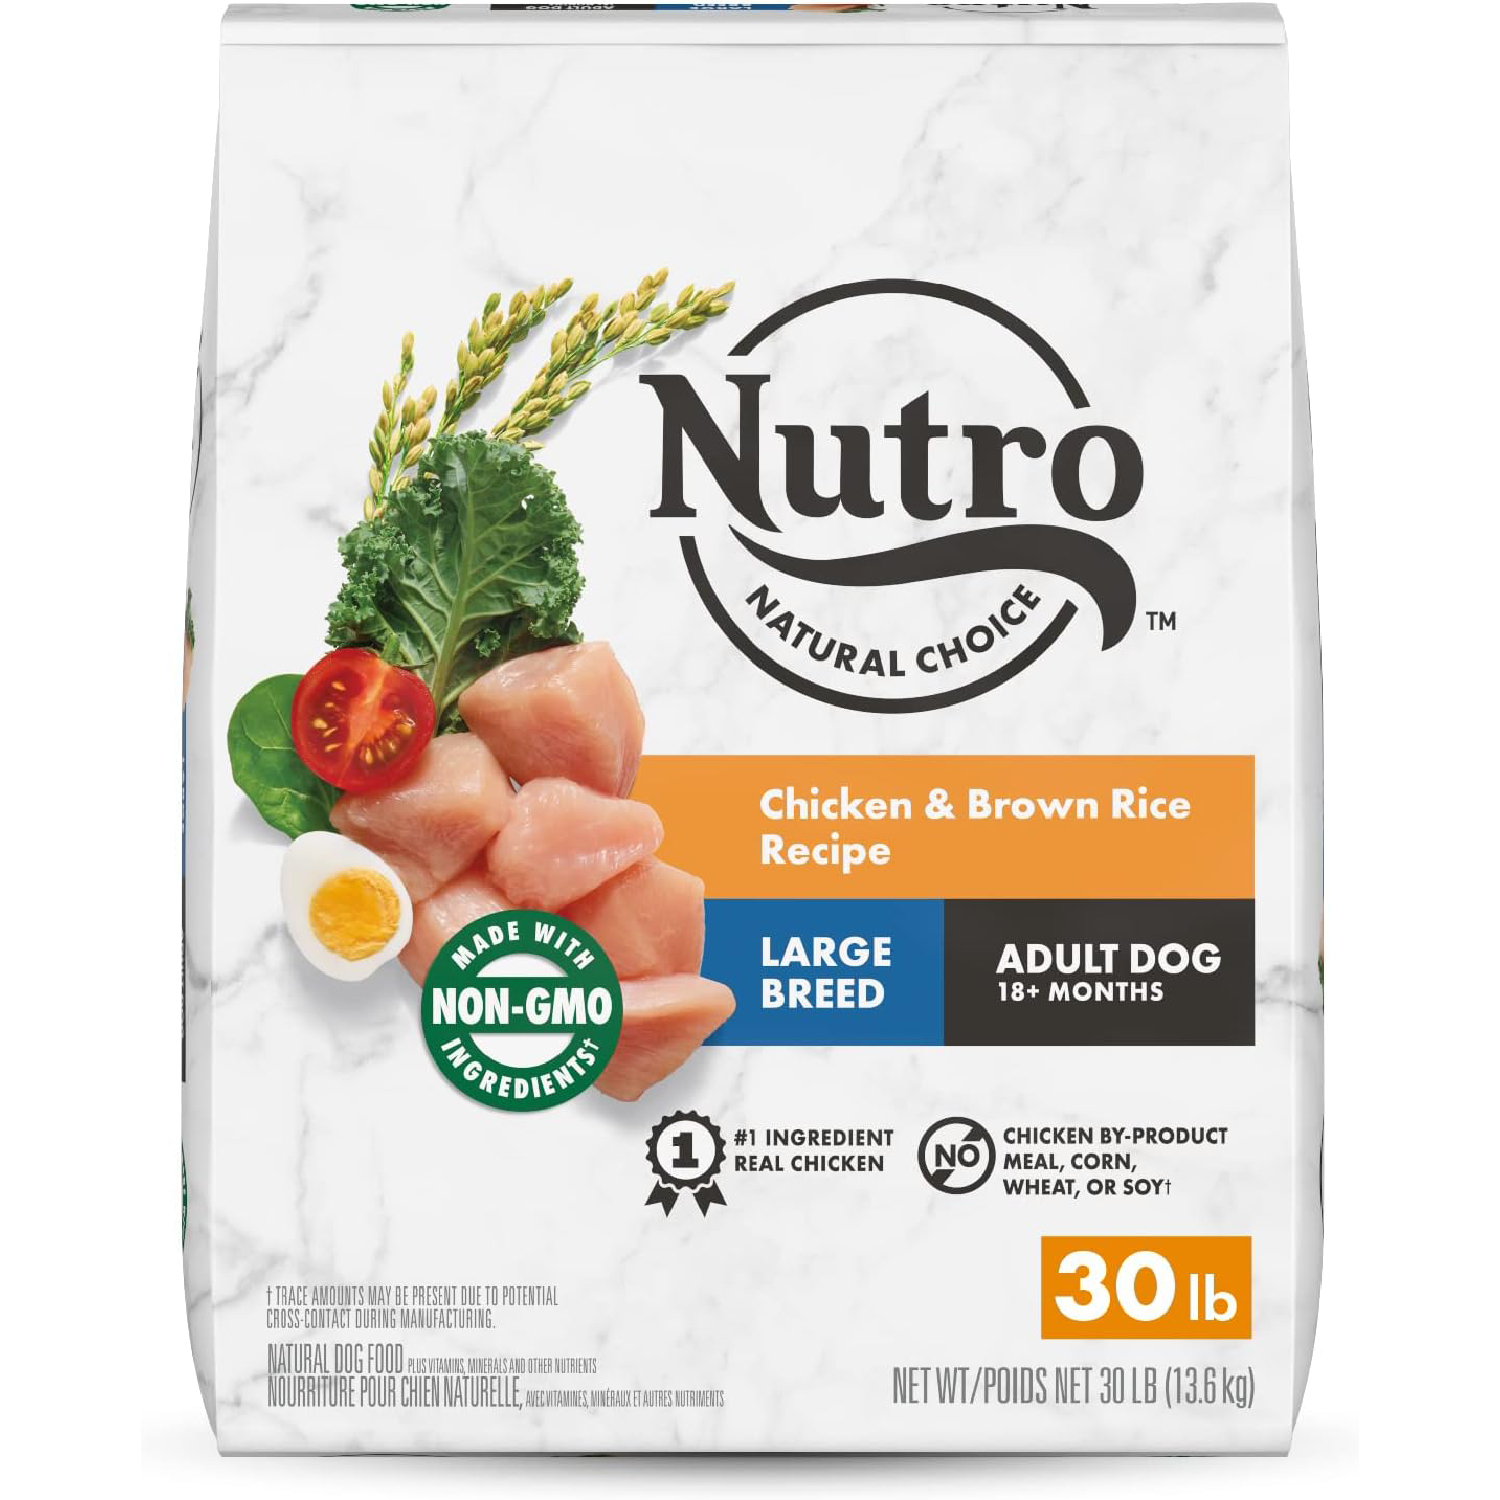 New Project NUTRO NATURAL CHOICE Large Breed Adult Dry Dog Food 